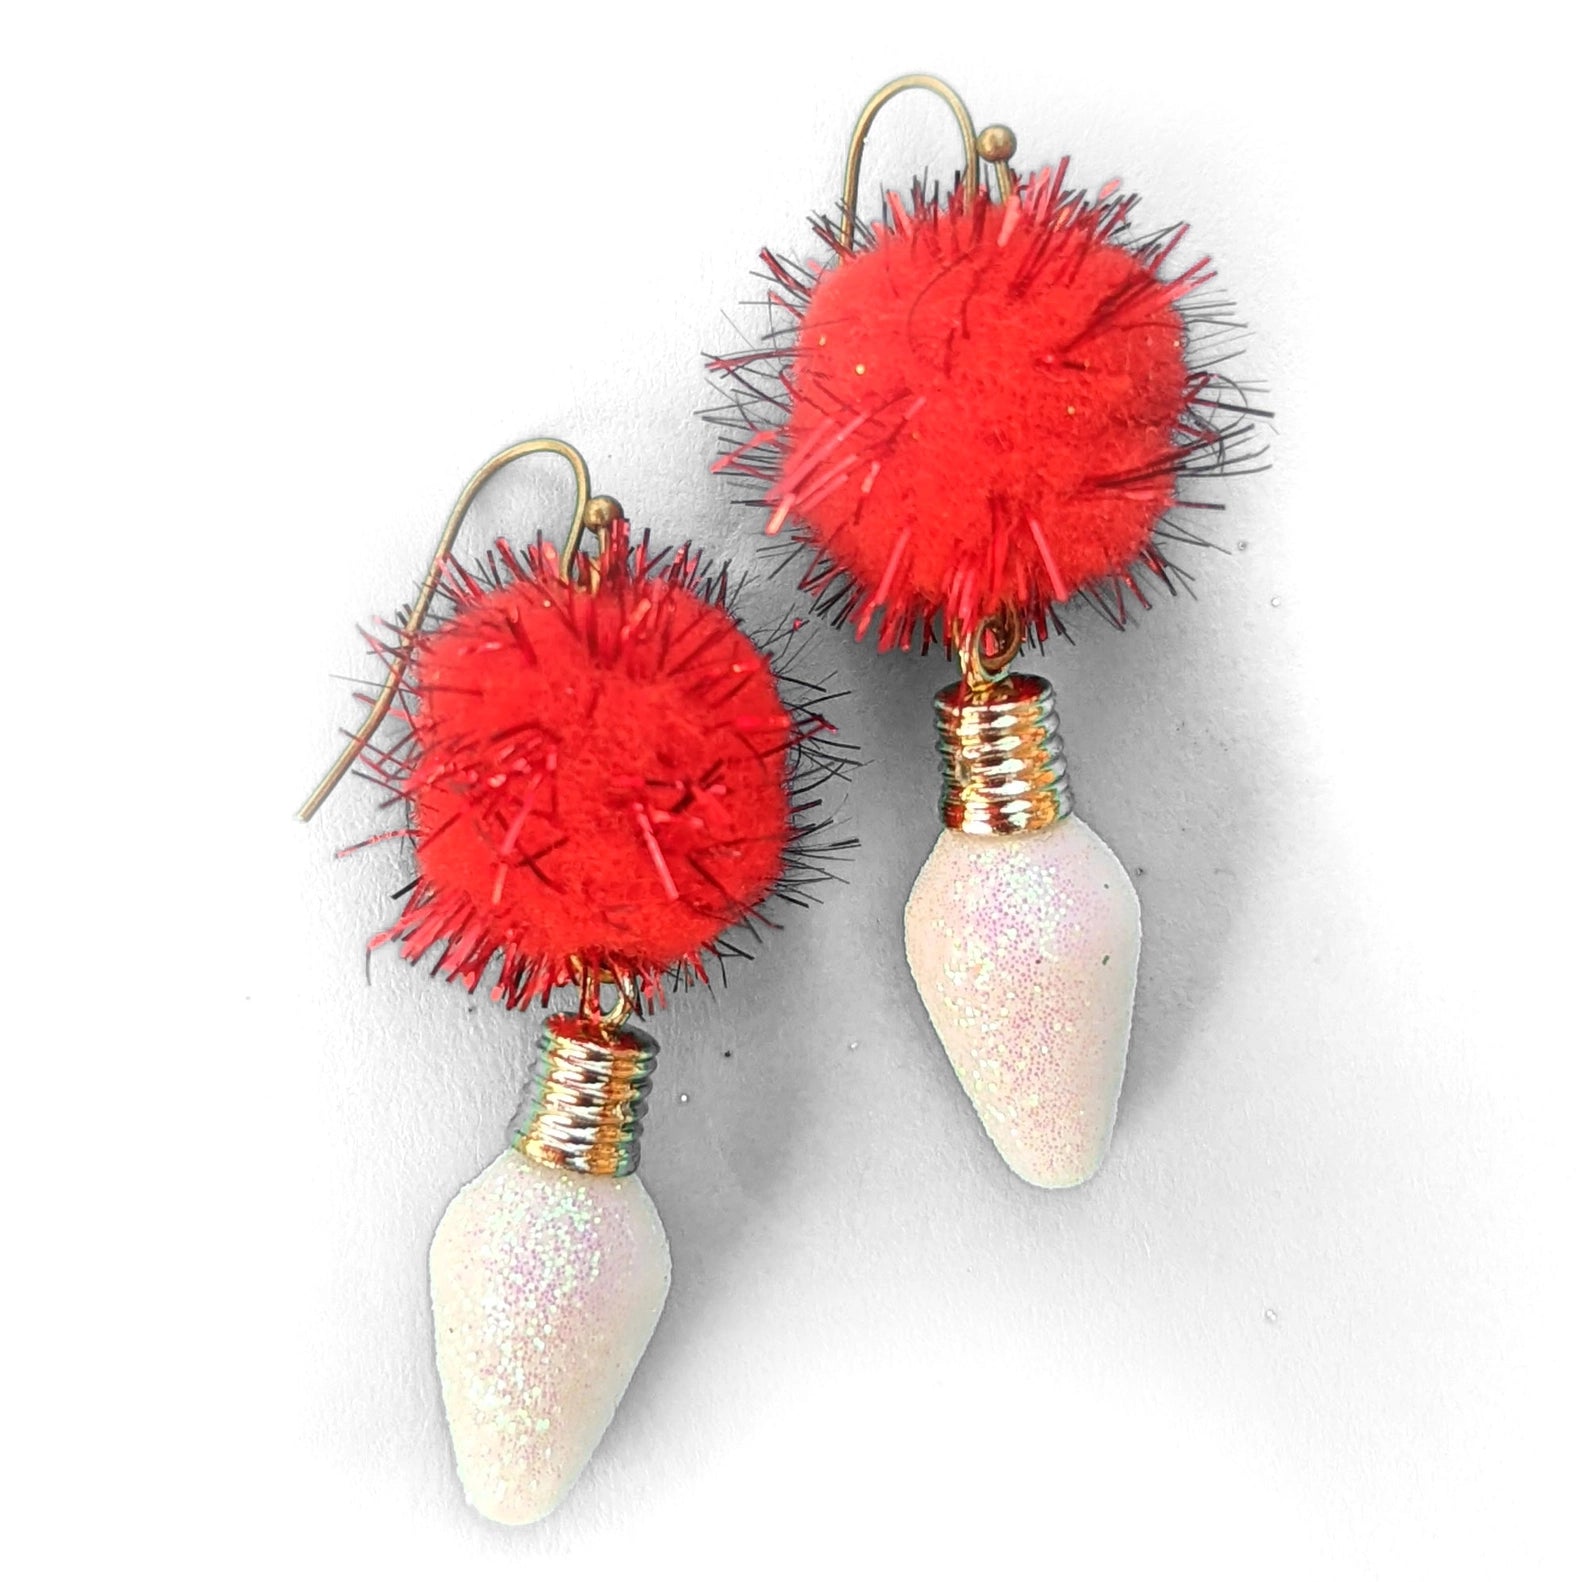 Red Pom Pom with White Glitter Bulb Ugly Christmas Earrings | Handmade in the US